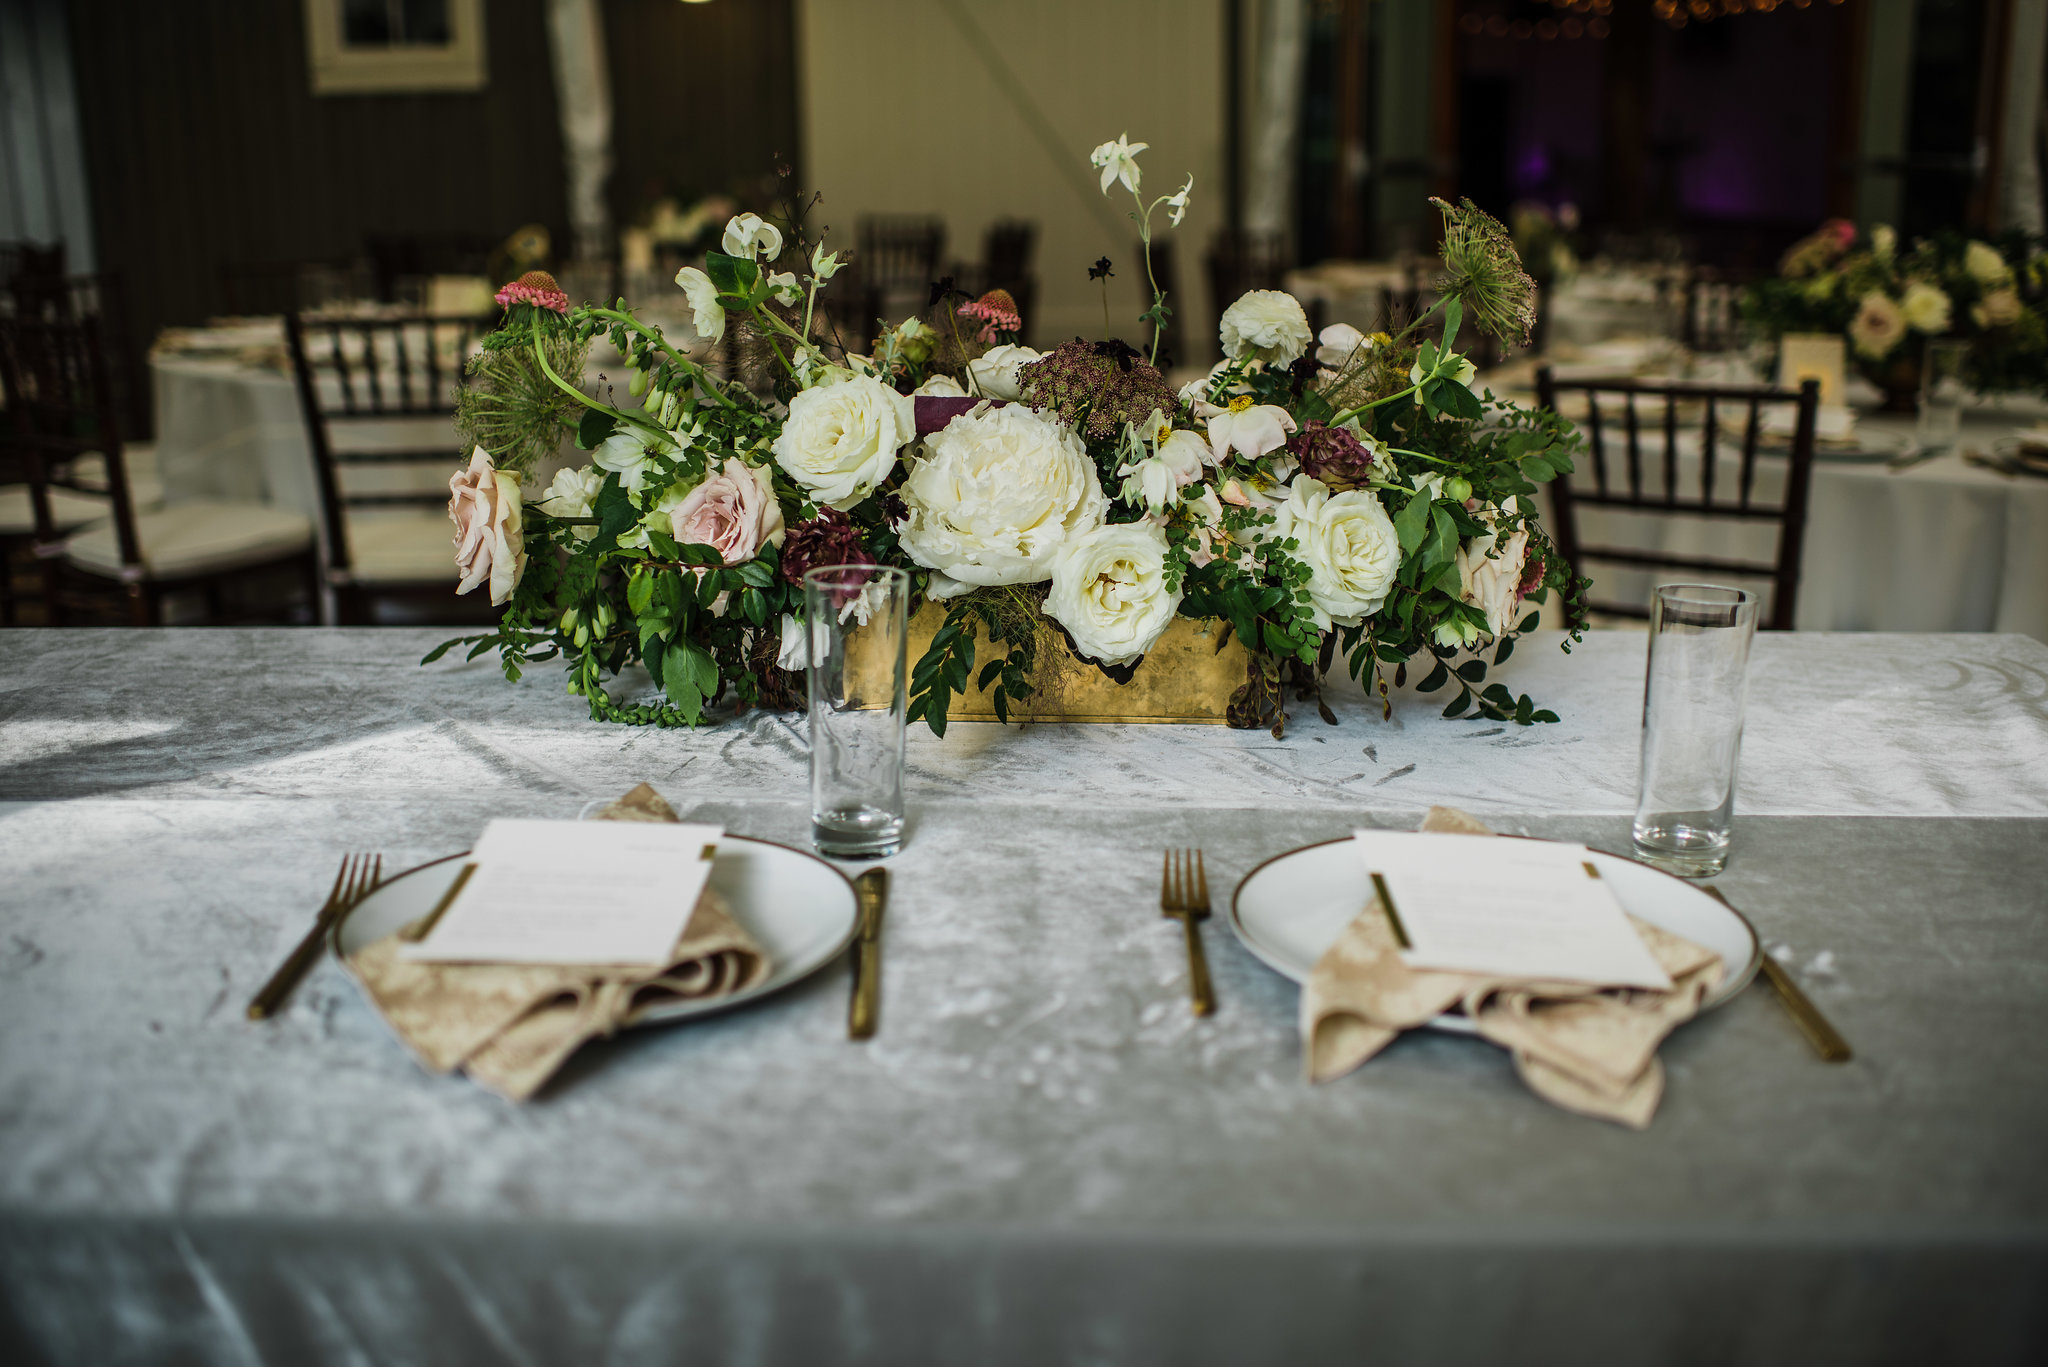 Velvet linens and lush, organic florals for the sweetheart table // Art deco inspired wedding at Travellers Rest, Nashville, TN